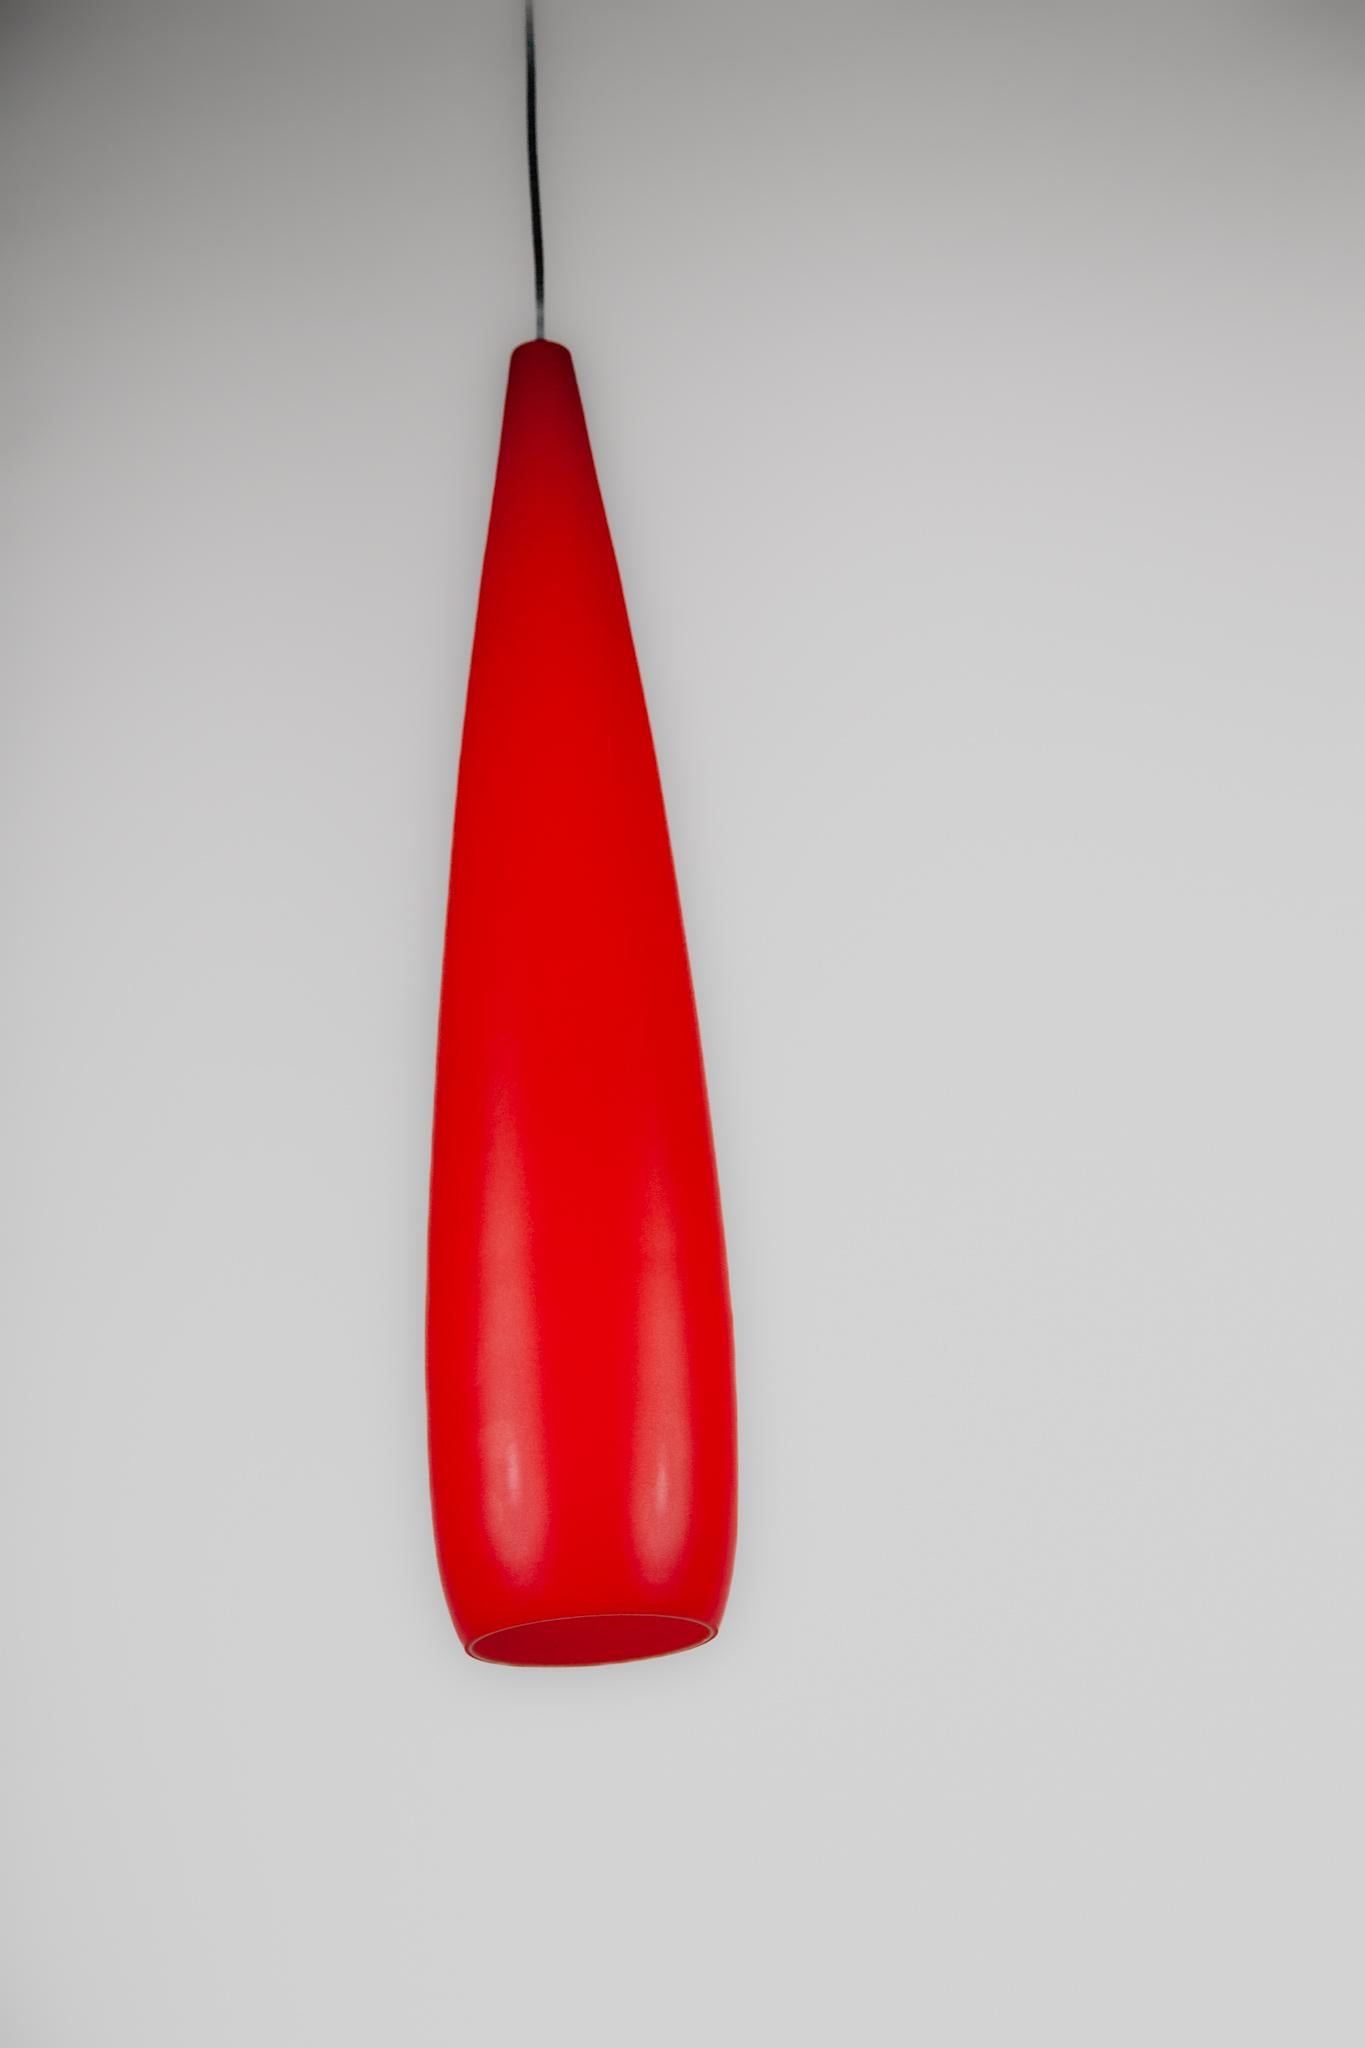 Mid-Century Modern Italian Red Opal Glass Tube Pendant Lamp by Pianon for Vistosi, 1960s For Sale